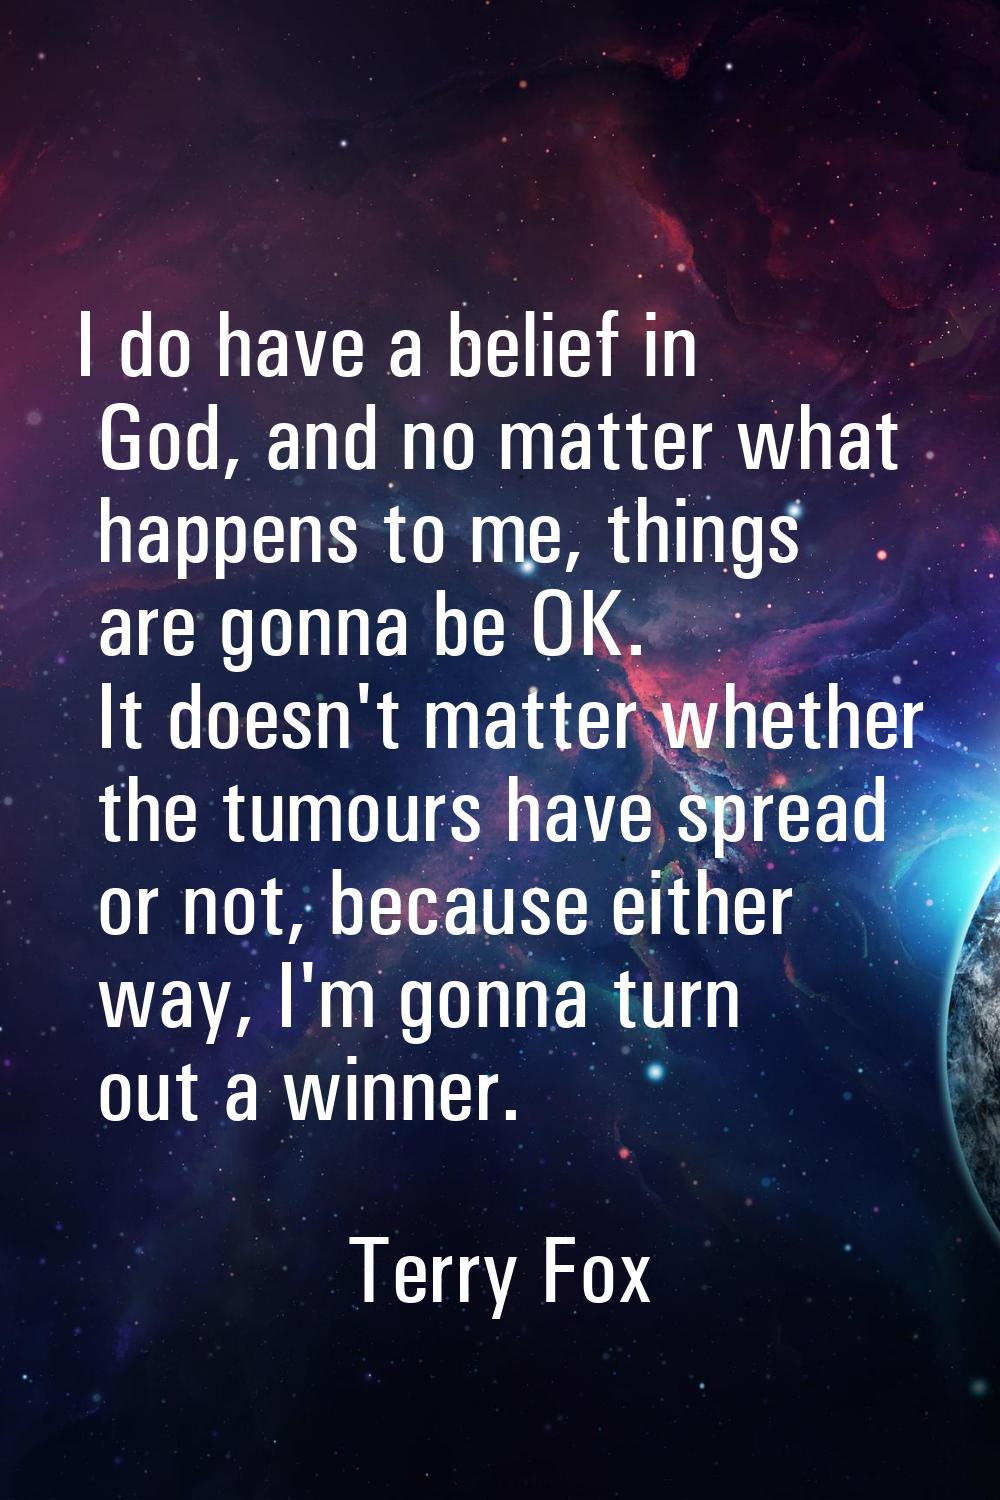 I do have a belief in God, and no matter what happens to me, things are gonna be OK. It doesn't mat